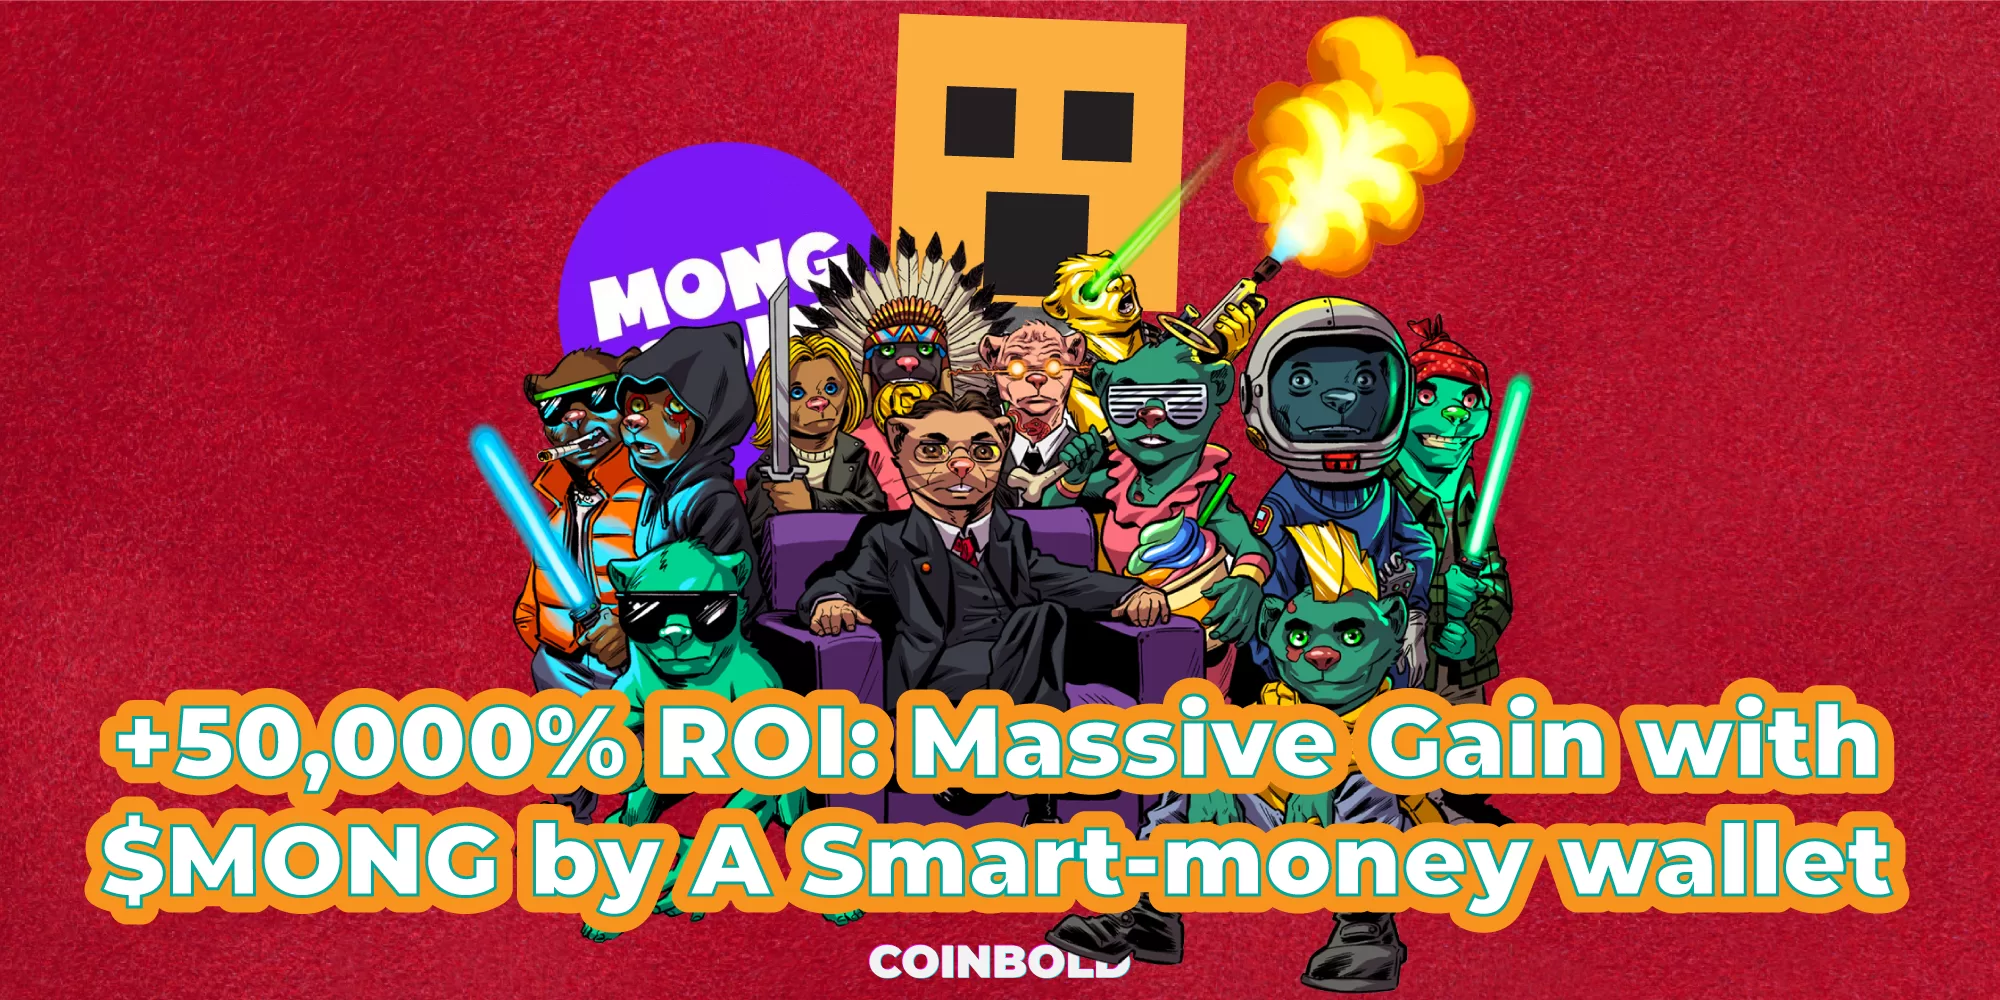 +50,000% ROI: Massive Gain with $MONG by A Smart-money wallet